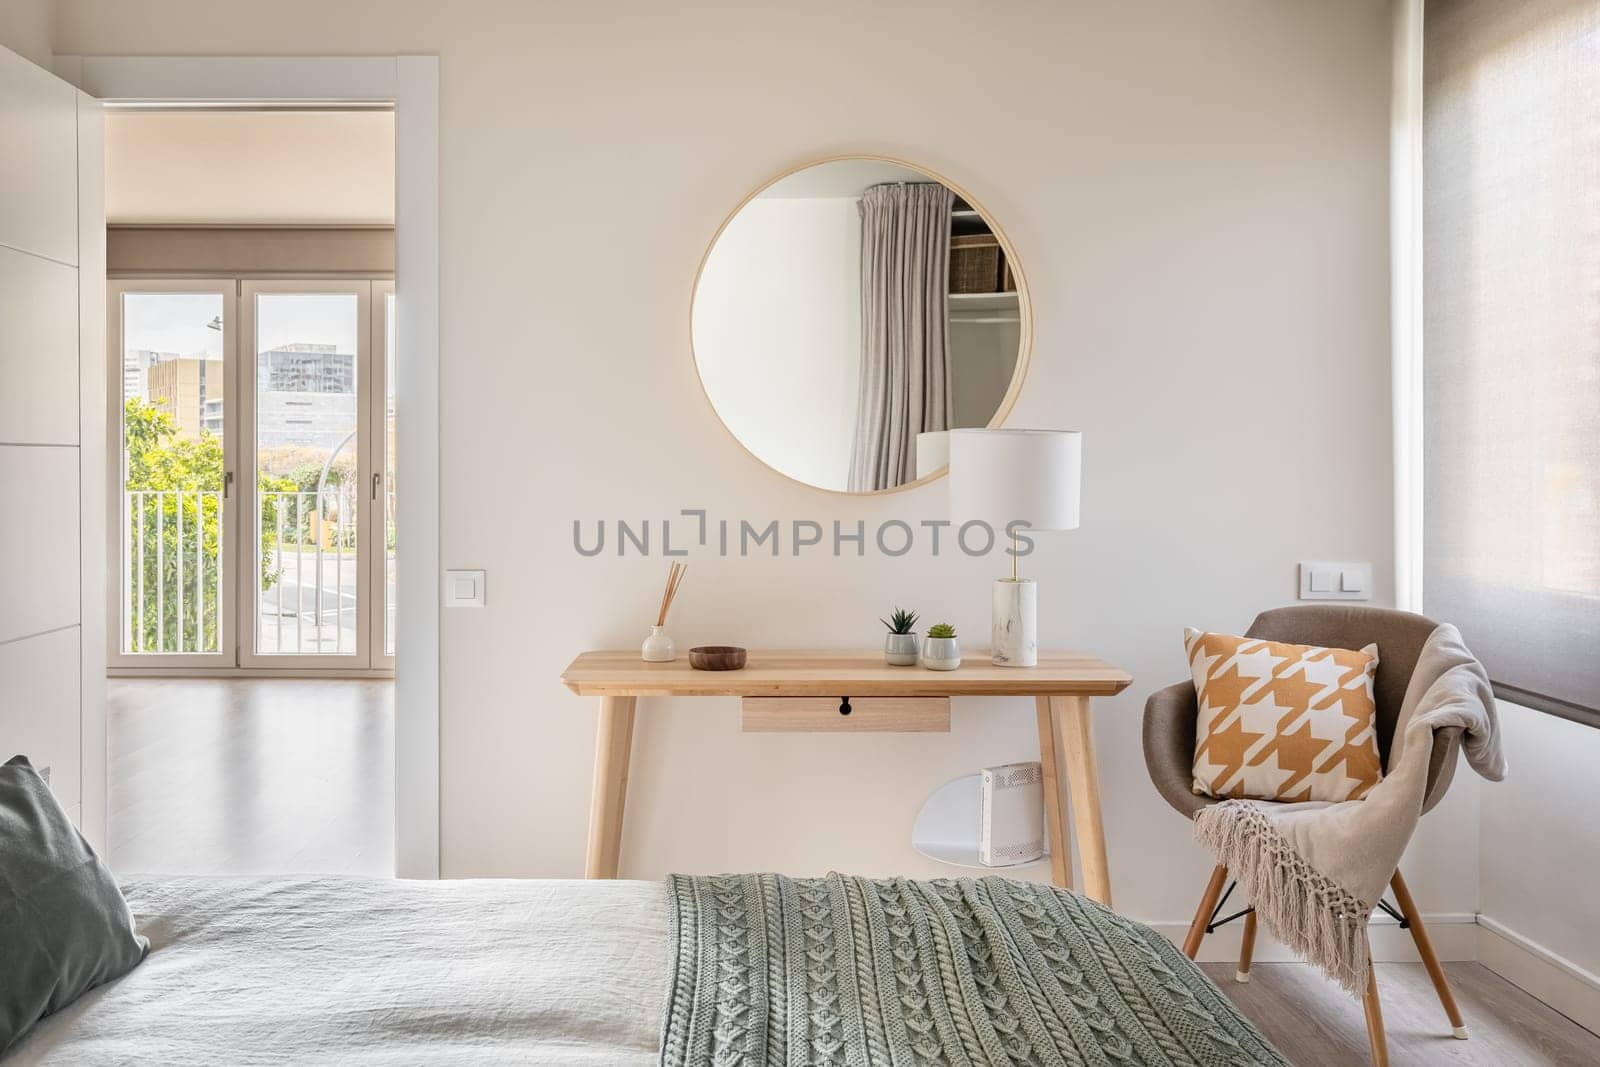 Bedroom in light colors with wooden eco furniture and accessories with a mirror and a panoramic window. The concept of a laconic Scandinavian interior. Copyspace.